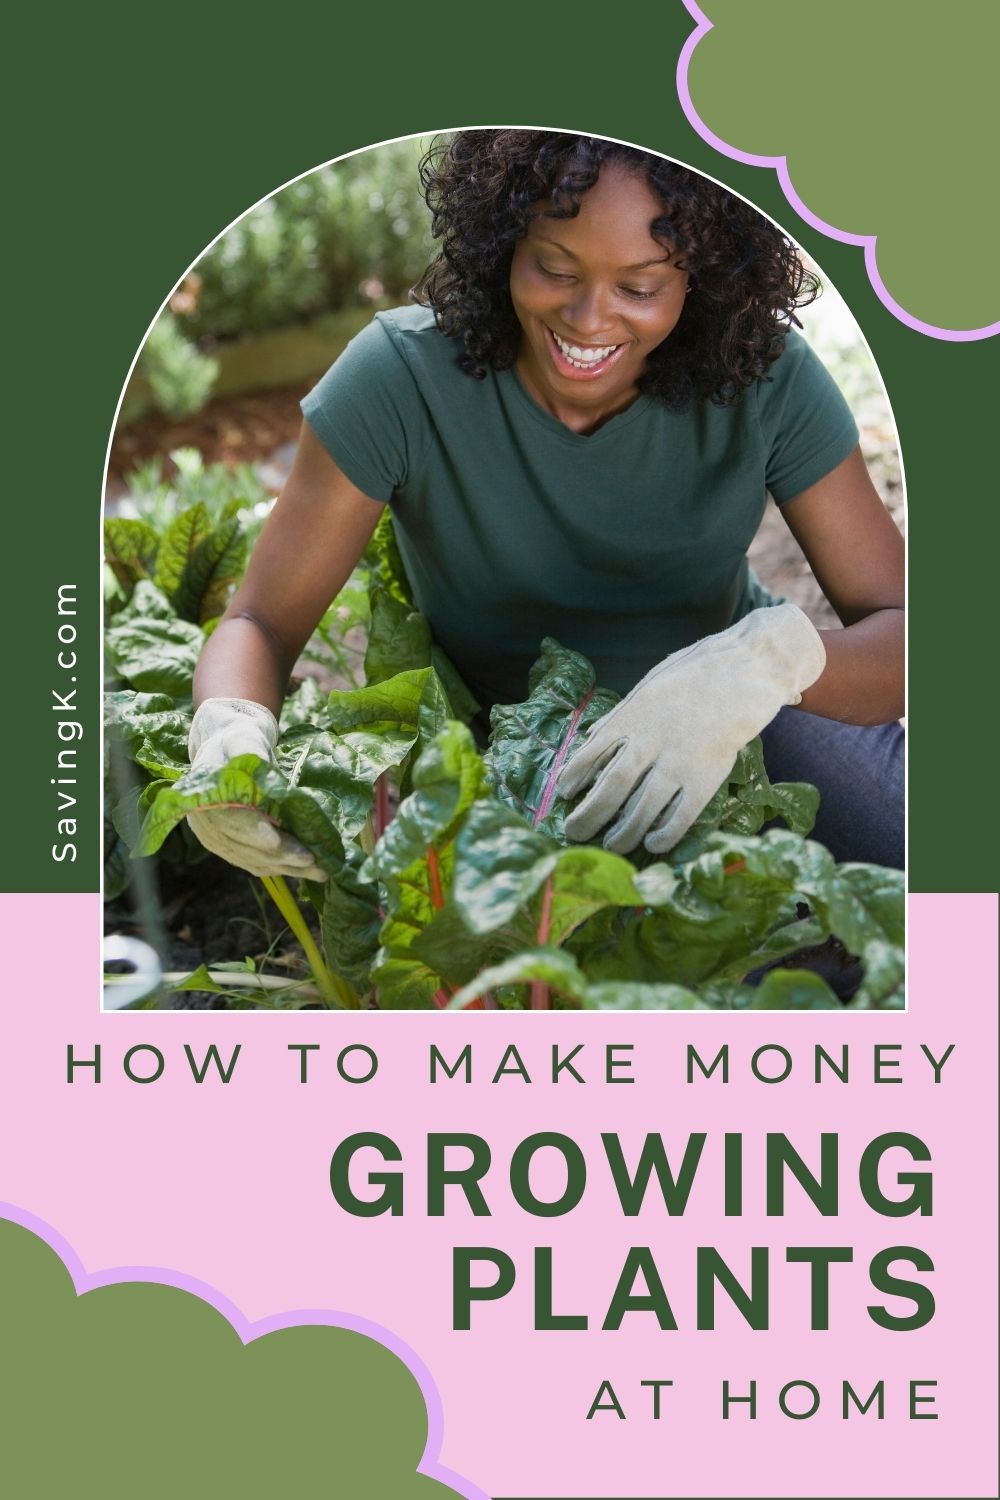 How To Make Money Growing Plants At Home